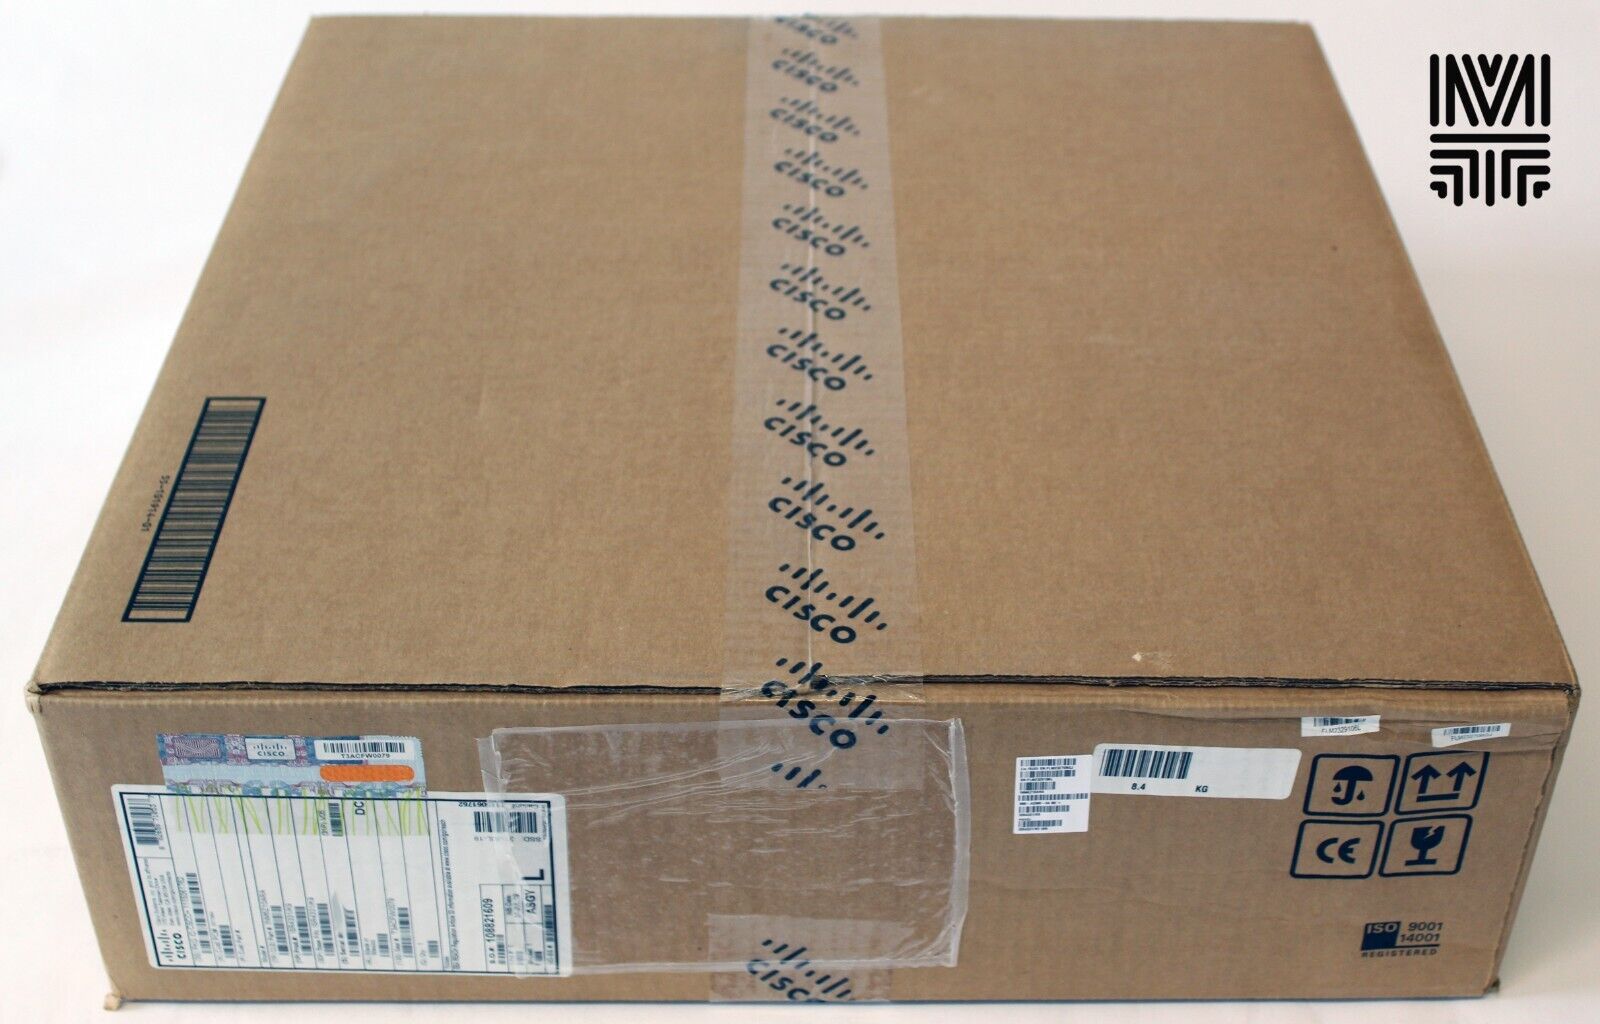 Cisco ISR4331/K9 Integrated Services 4331 Router with GLC-TE **New In Box**